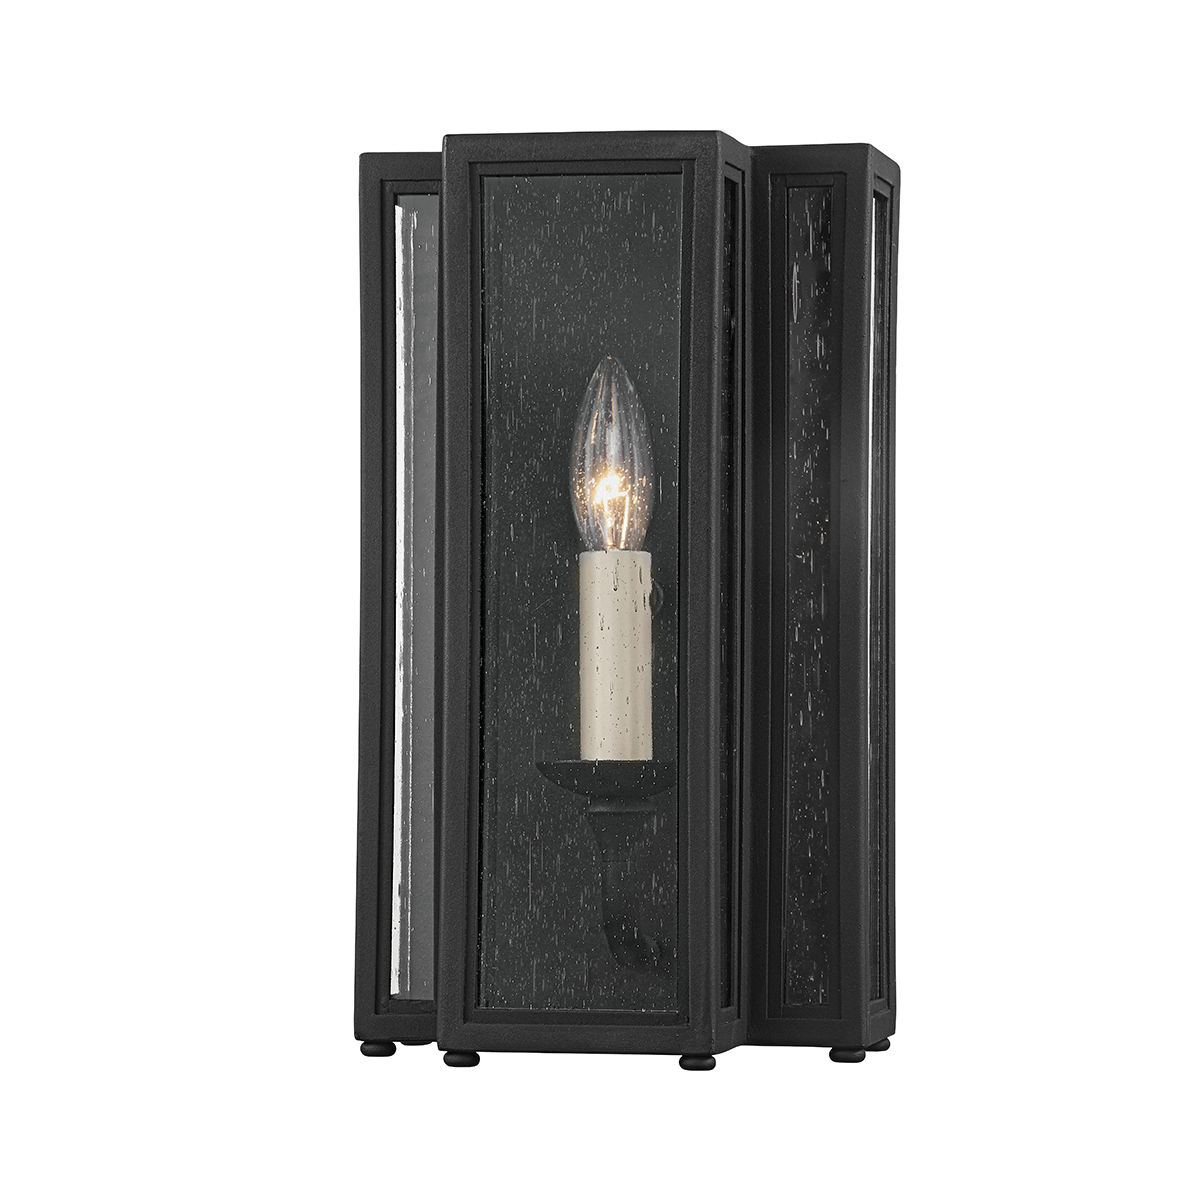 Troy Lighting 1 LIGHT SMALL EXTERIOR WALL SCONCE B3601 Outdoor l Wall Troy Lighting TEXTURE BLACK  